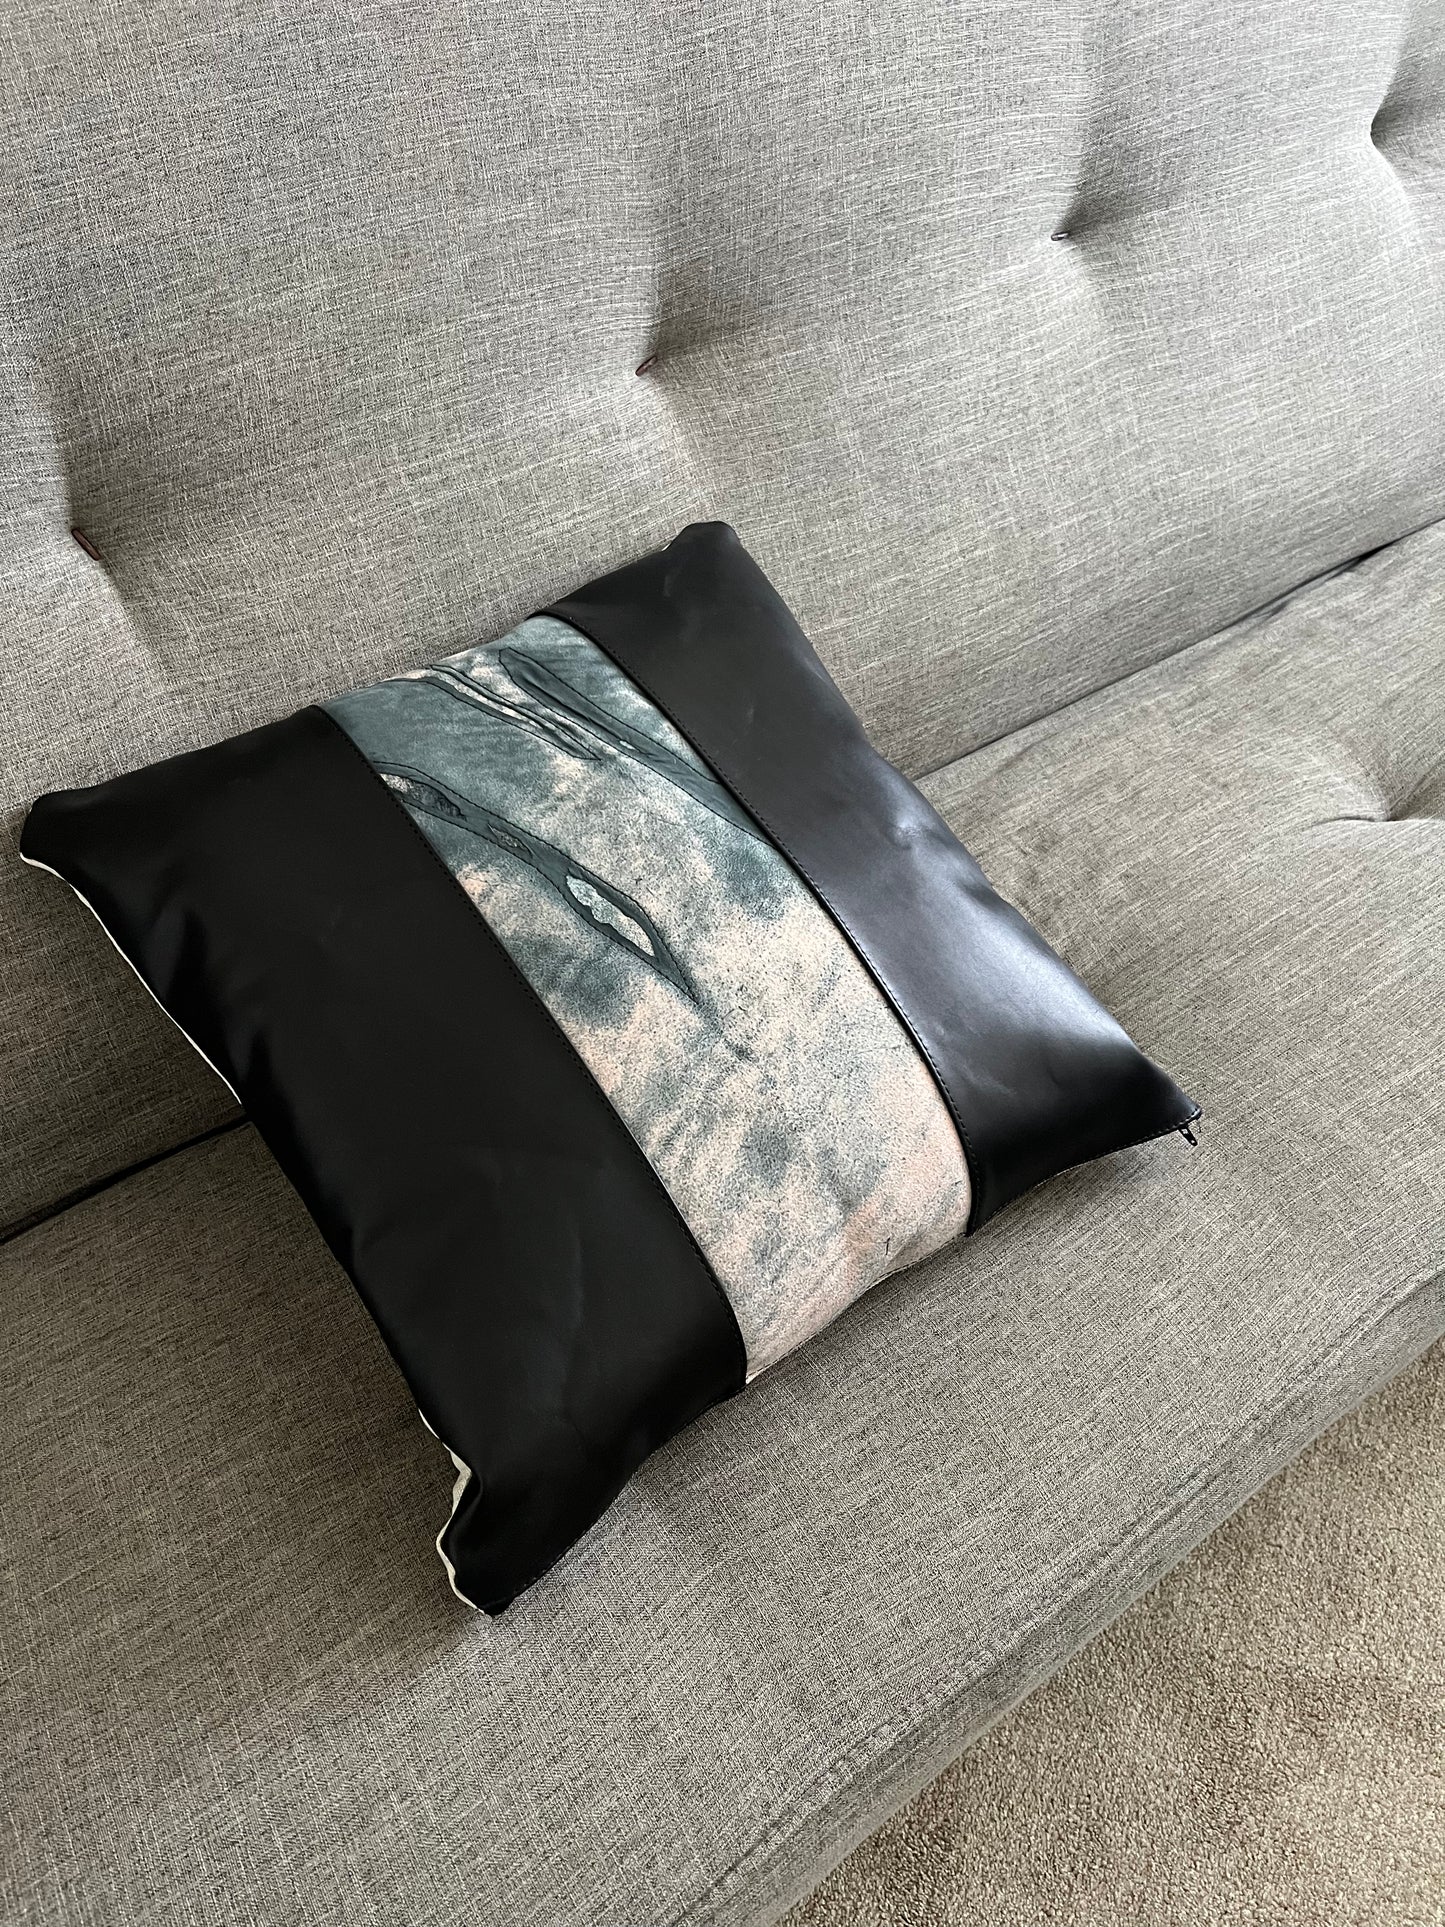 Large Leather Pillow | One of a Kind Art Pillow | Full Grain Leather Throw Pillow